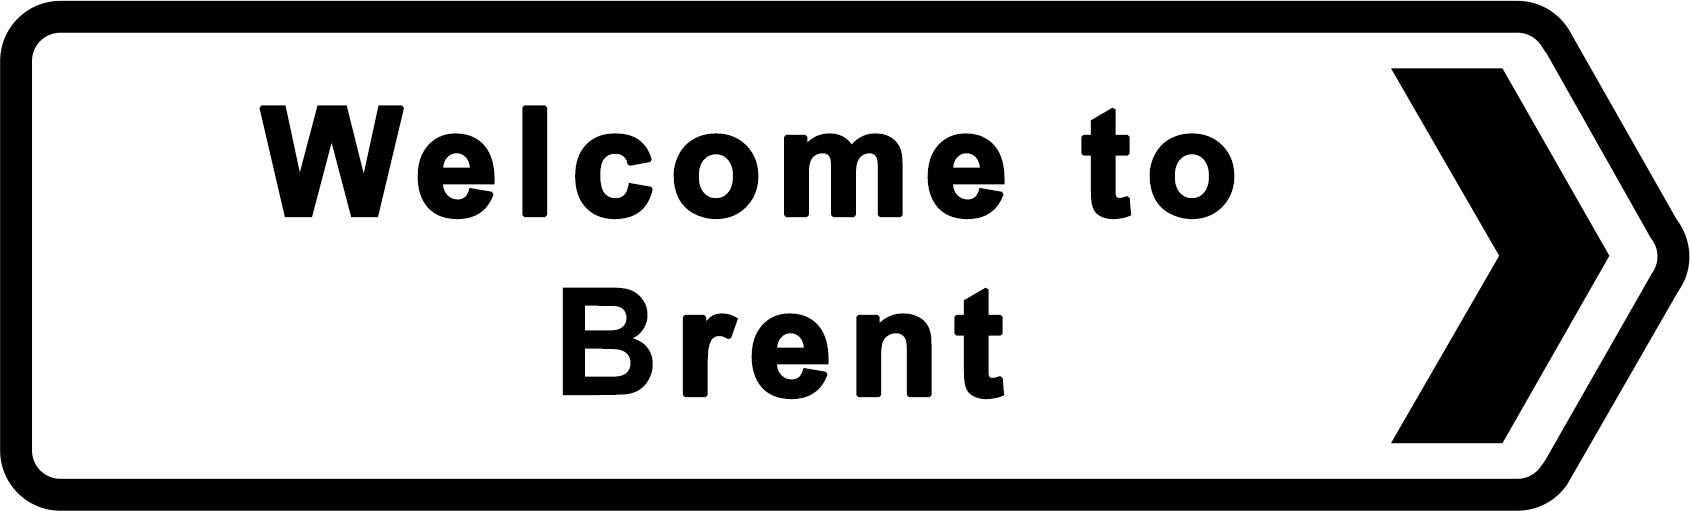 London Borough of Brent Coat of Arms - Cheap Driving Schools Lessons in Brent, The London Borough of Brent, Greater London